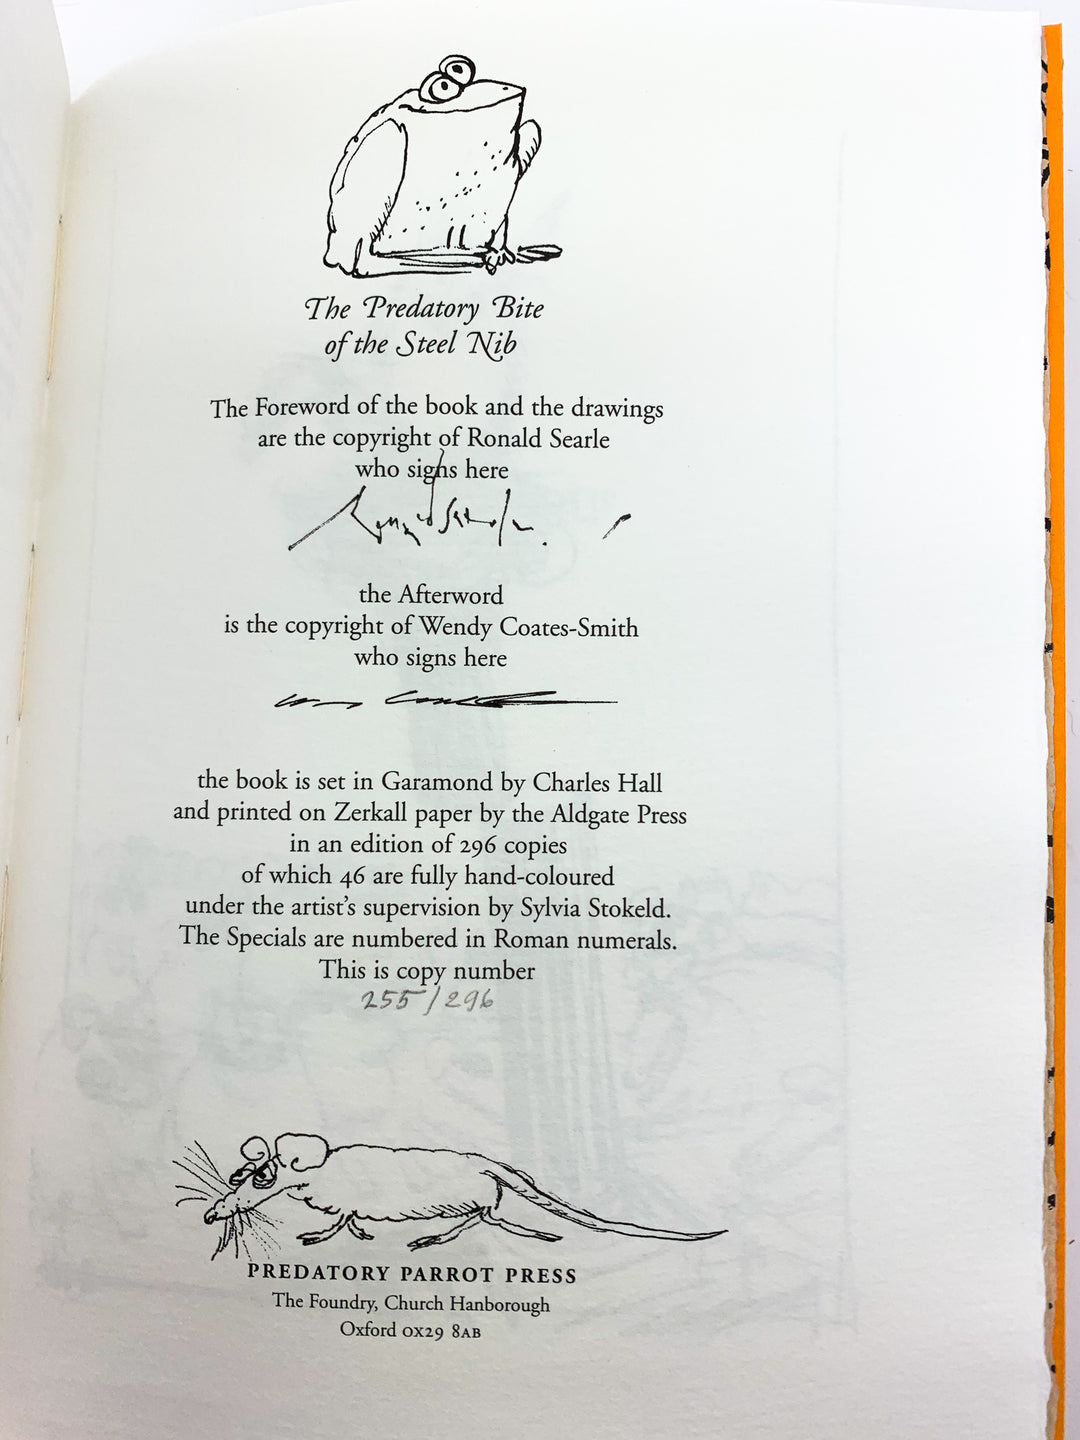 Searle, Ronald - The Predatory Bite of the Steel Nib - The Scrapbook Drawings of Ronald Searle - SIGNED | signature page